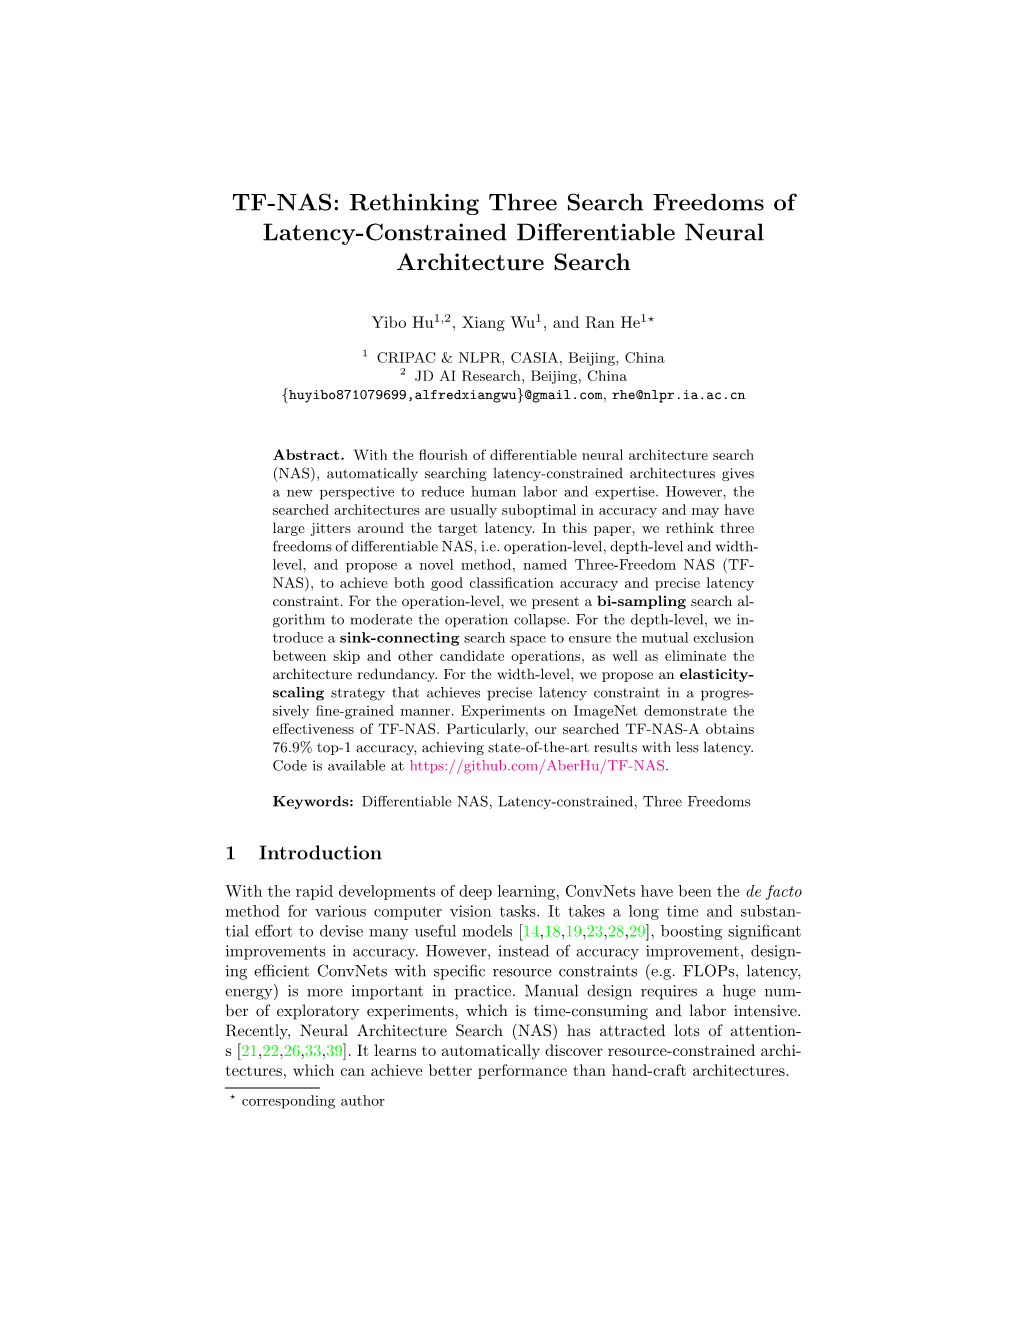 TF-NAS: Rethinking Three Search Freedoms of Latency-Constrained Differentiable Neural Architecture Search